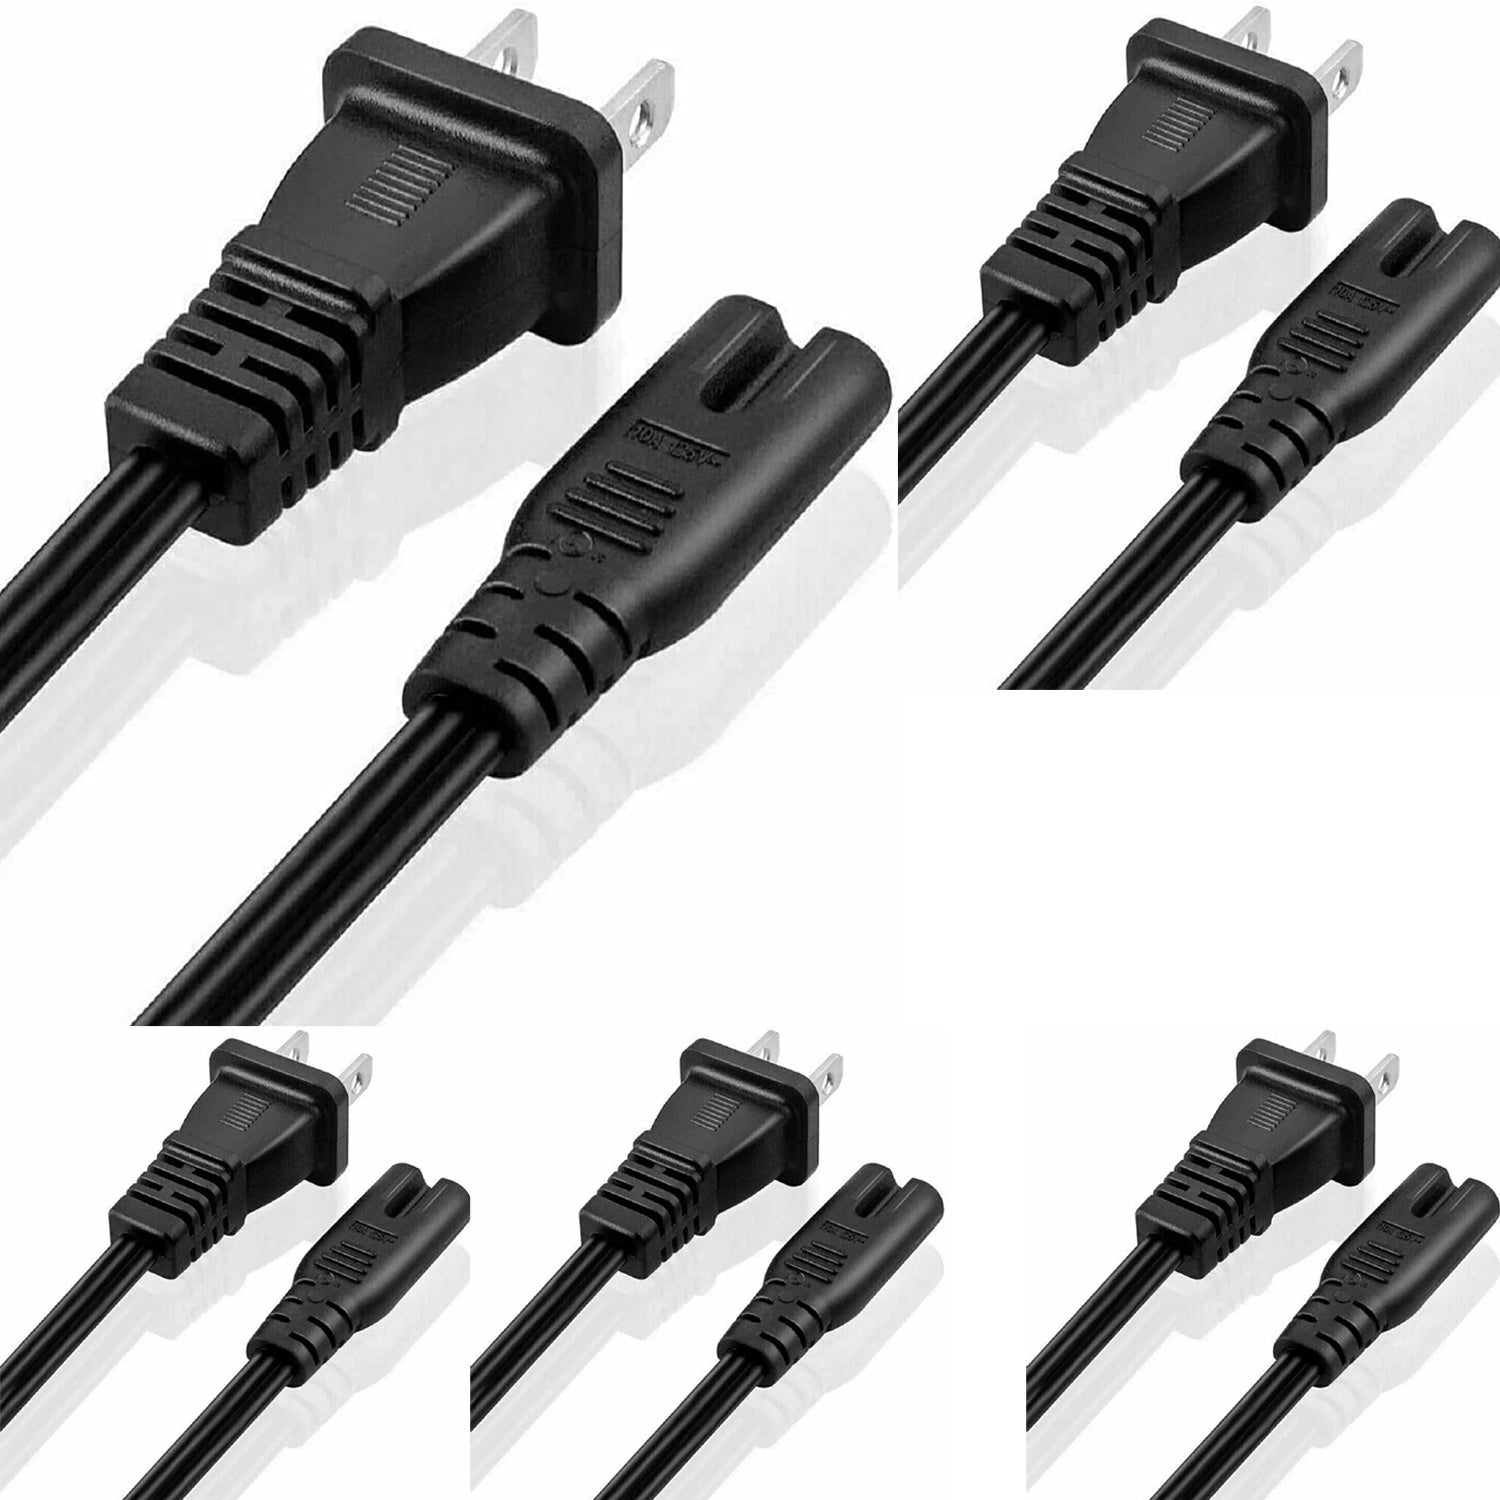 5Core Extra Long AC Wall Power Cord for Led LCD TV Vizio Samsung 12 Feet 2 Prong PP 1002